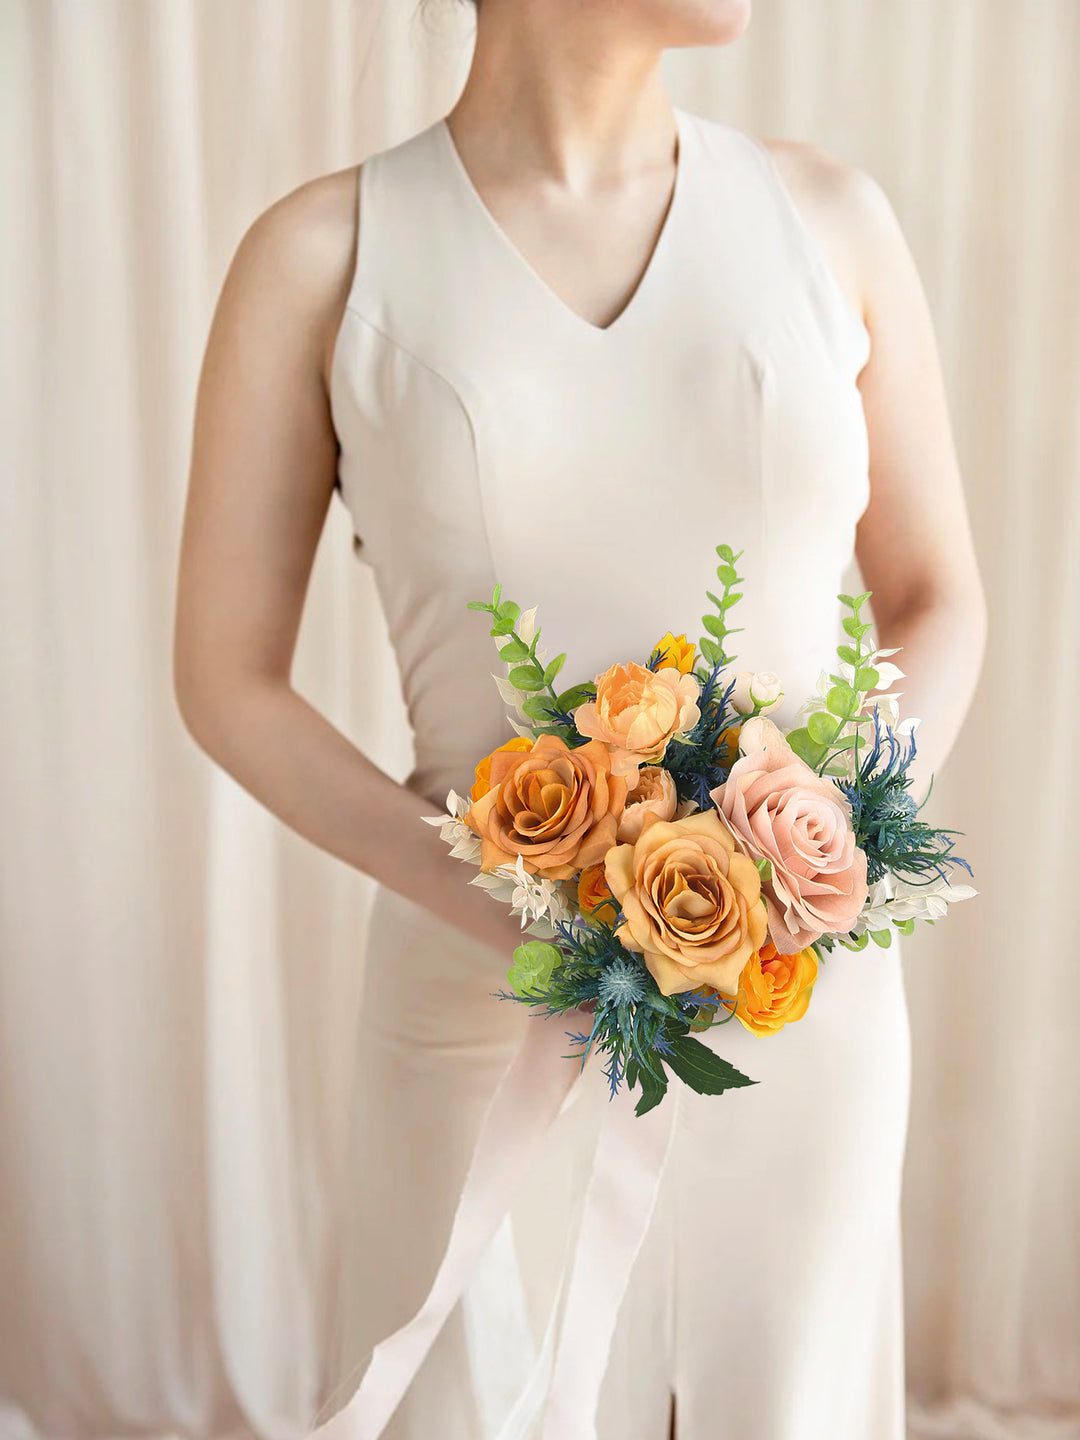 How to Choose Bridesmaids for Your Wedding? - Rinlong Flower